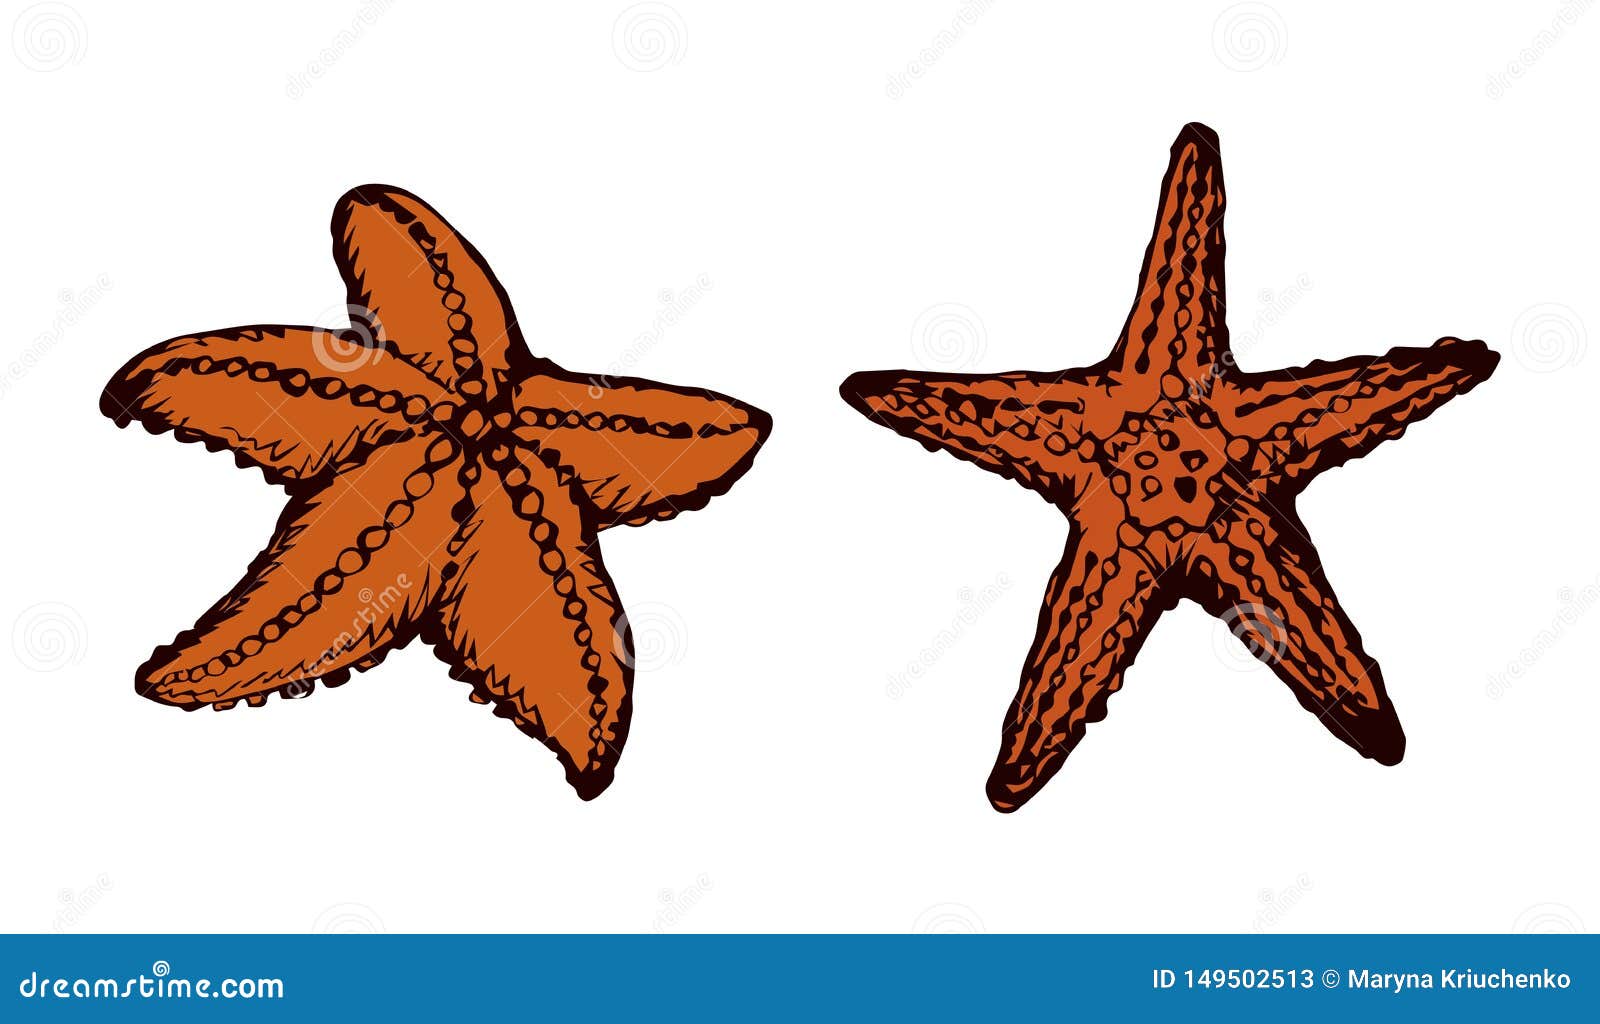 How easy to draw a starfish step by step drawings